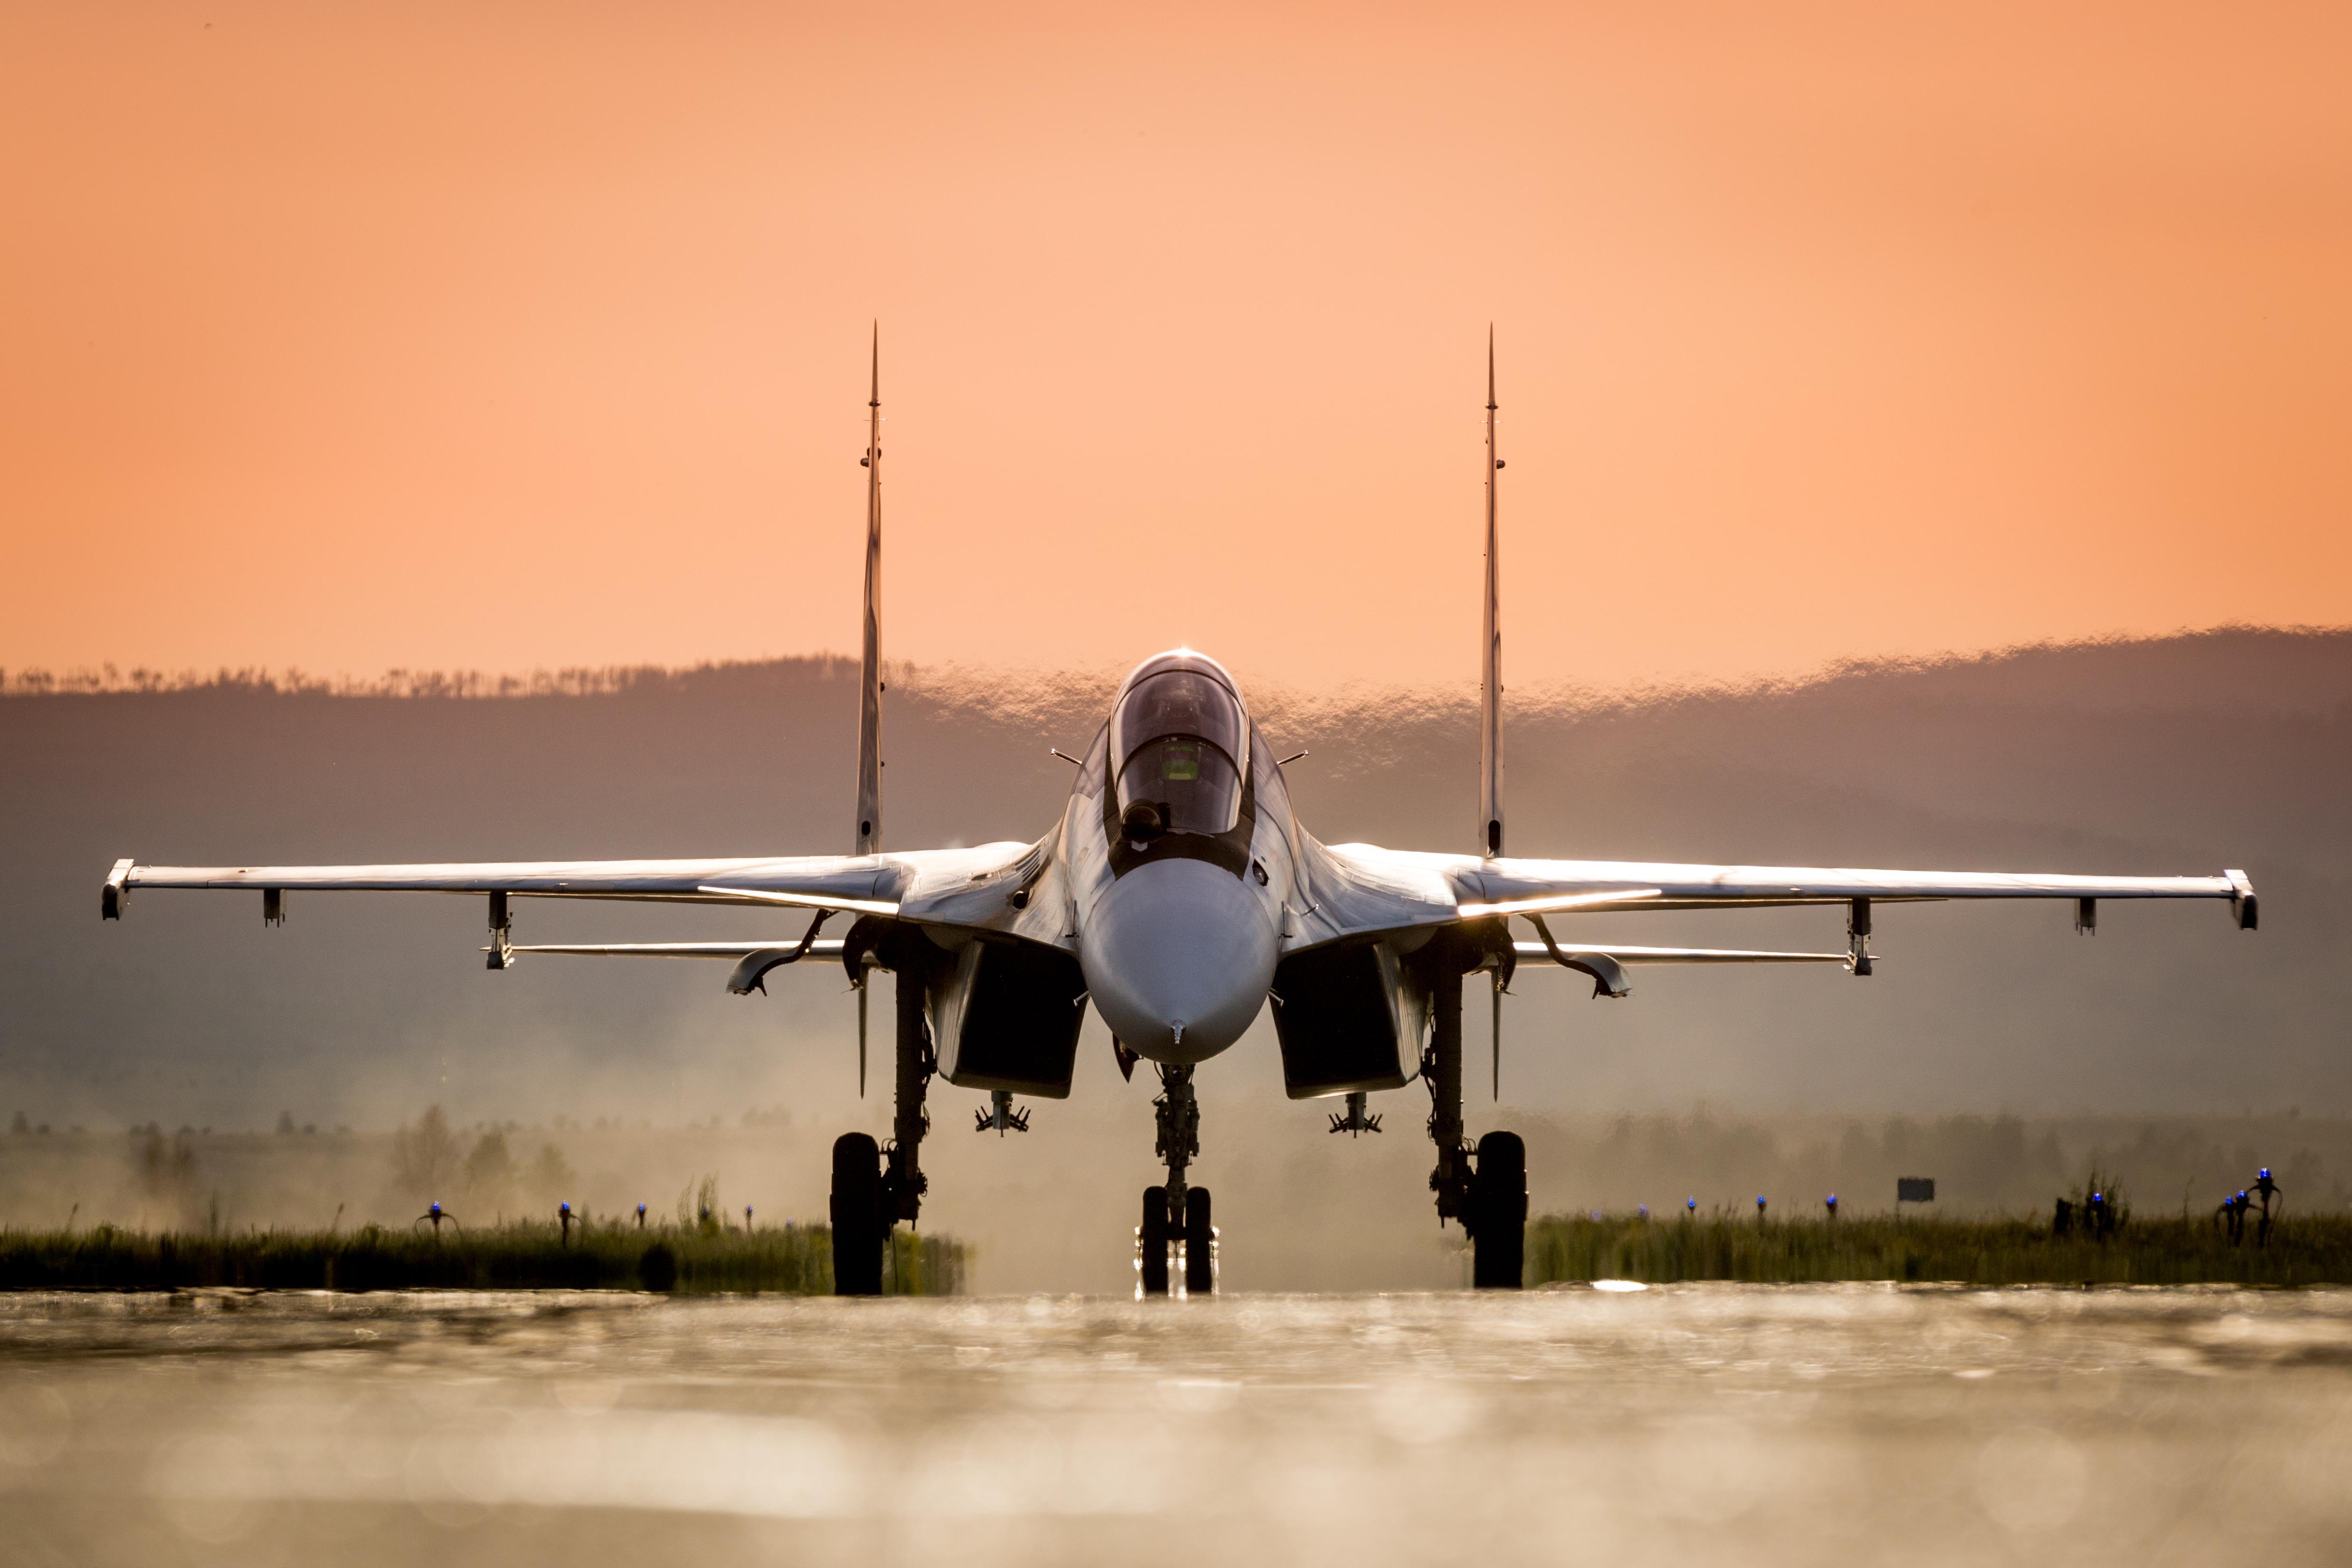 AviationWall on Twitter Ready to roll IndianAirForce Sukhoi30MKI  aviationwall aviationphotography httpstco6R5uQgRI1d  Twitter